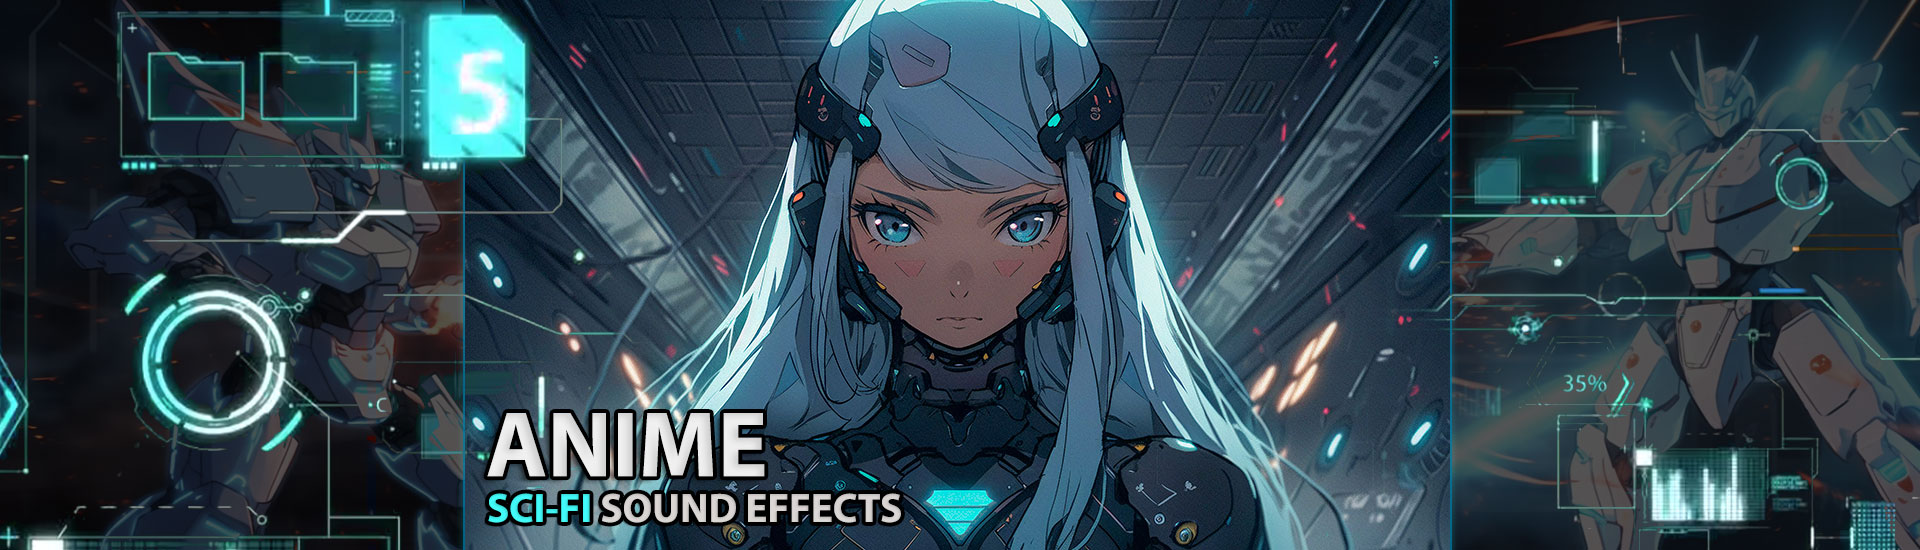 Anime Sci-Fi Sound Effects Pack